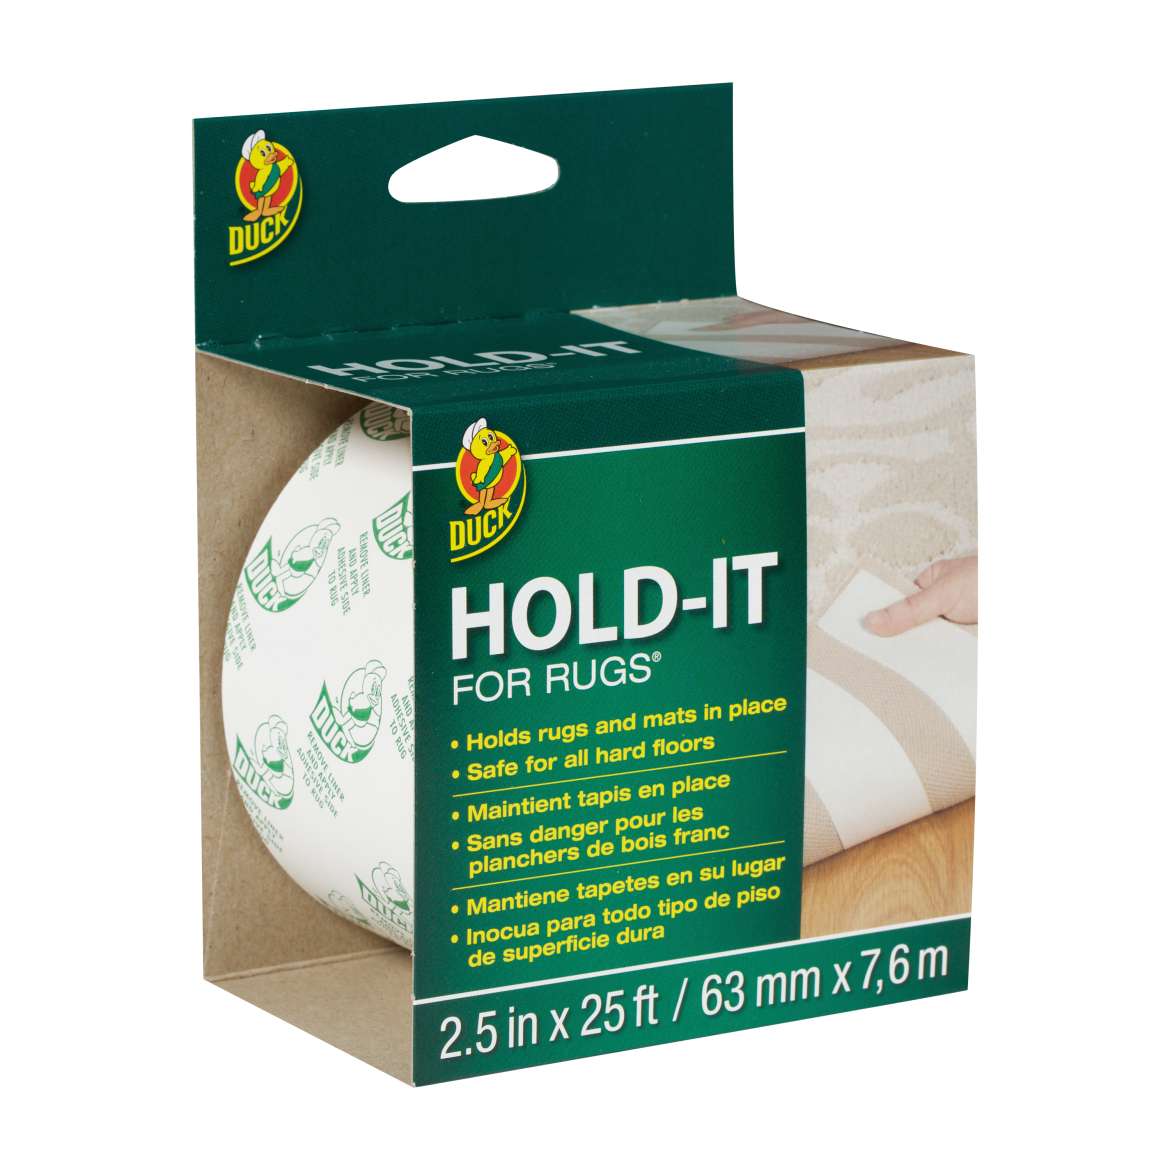 Duck Brand Hold-It For Rugs [Adhesive Latex Foam]